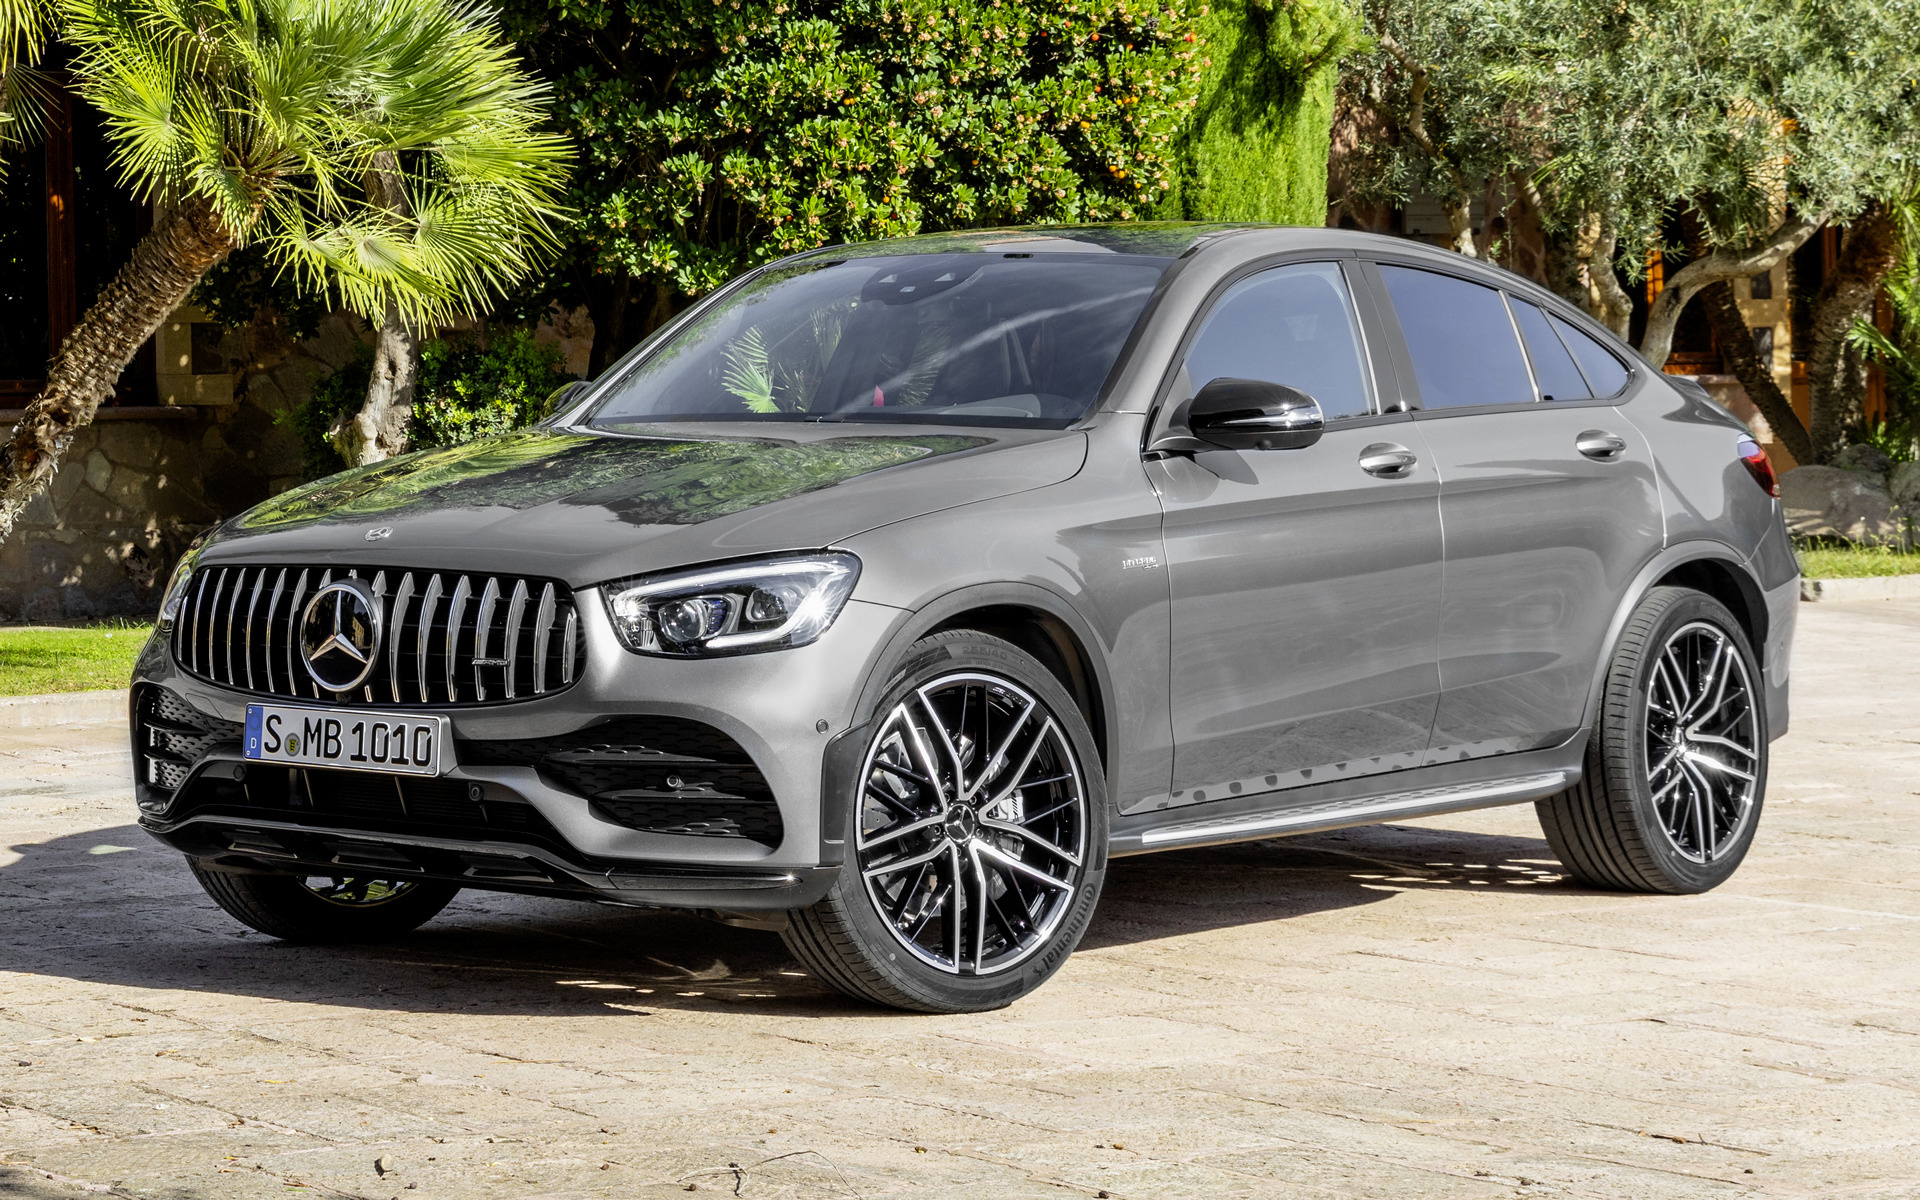 2019 Mercedes-AMG GLC 43 Coupe - Wallpapers and HD Images | Car Pixel